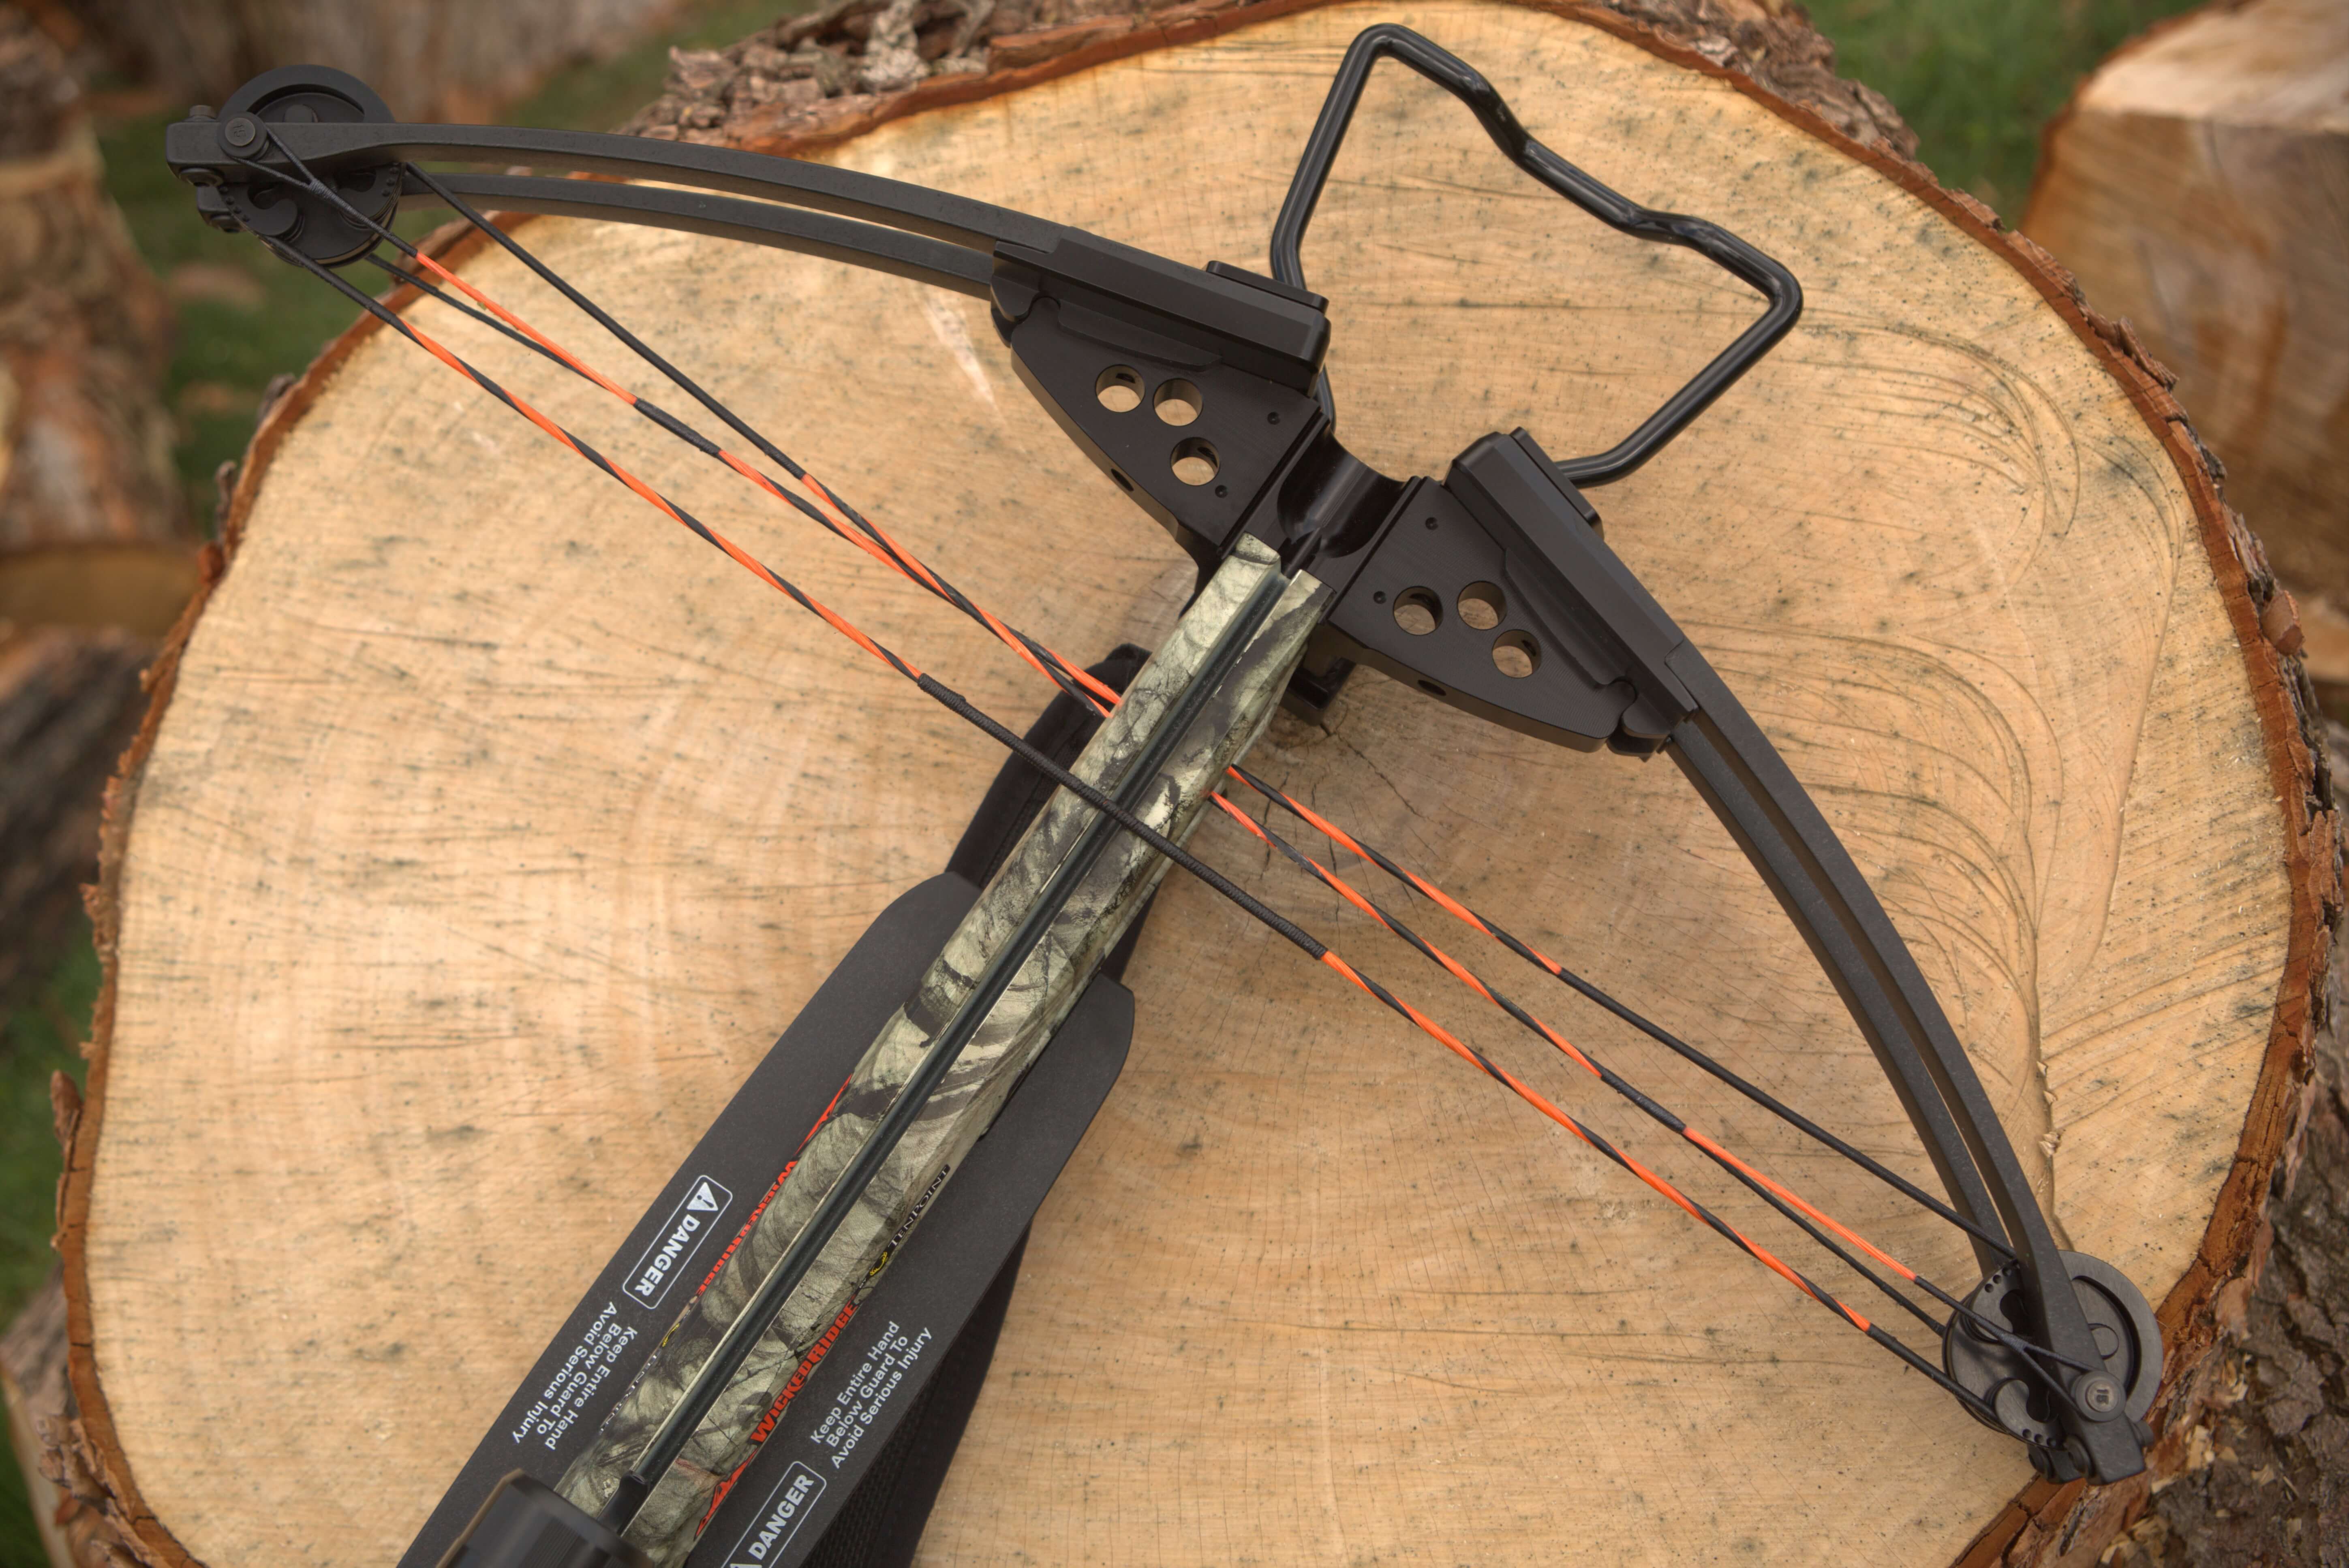 This crossbow shows the sunset black bow string colors in action